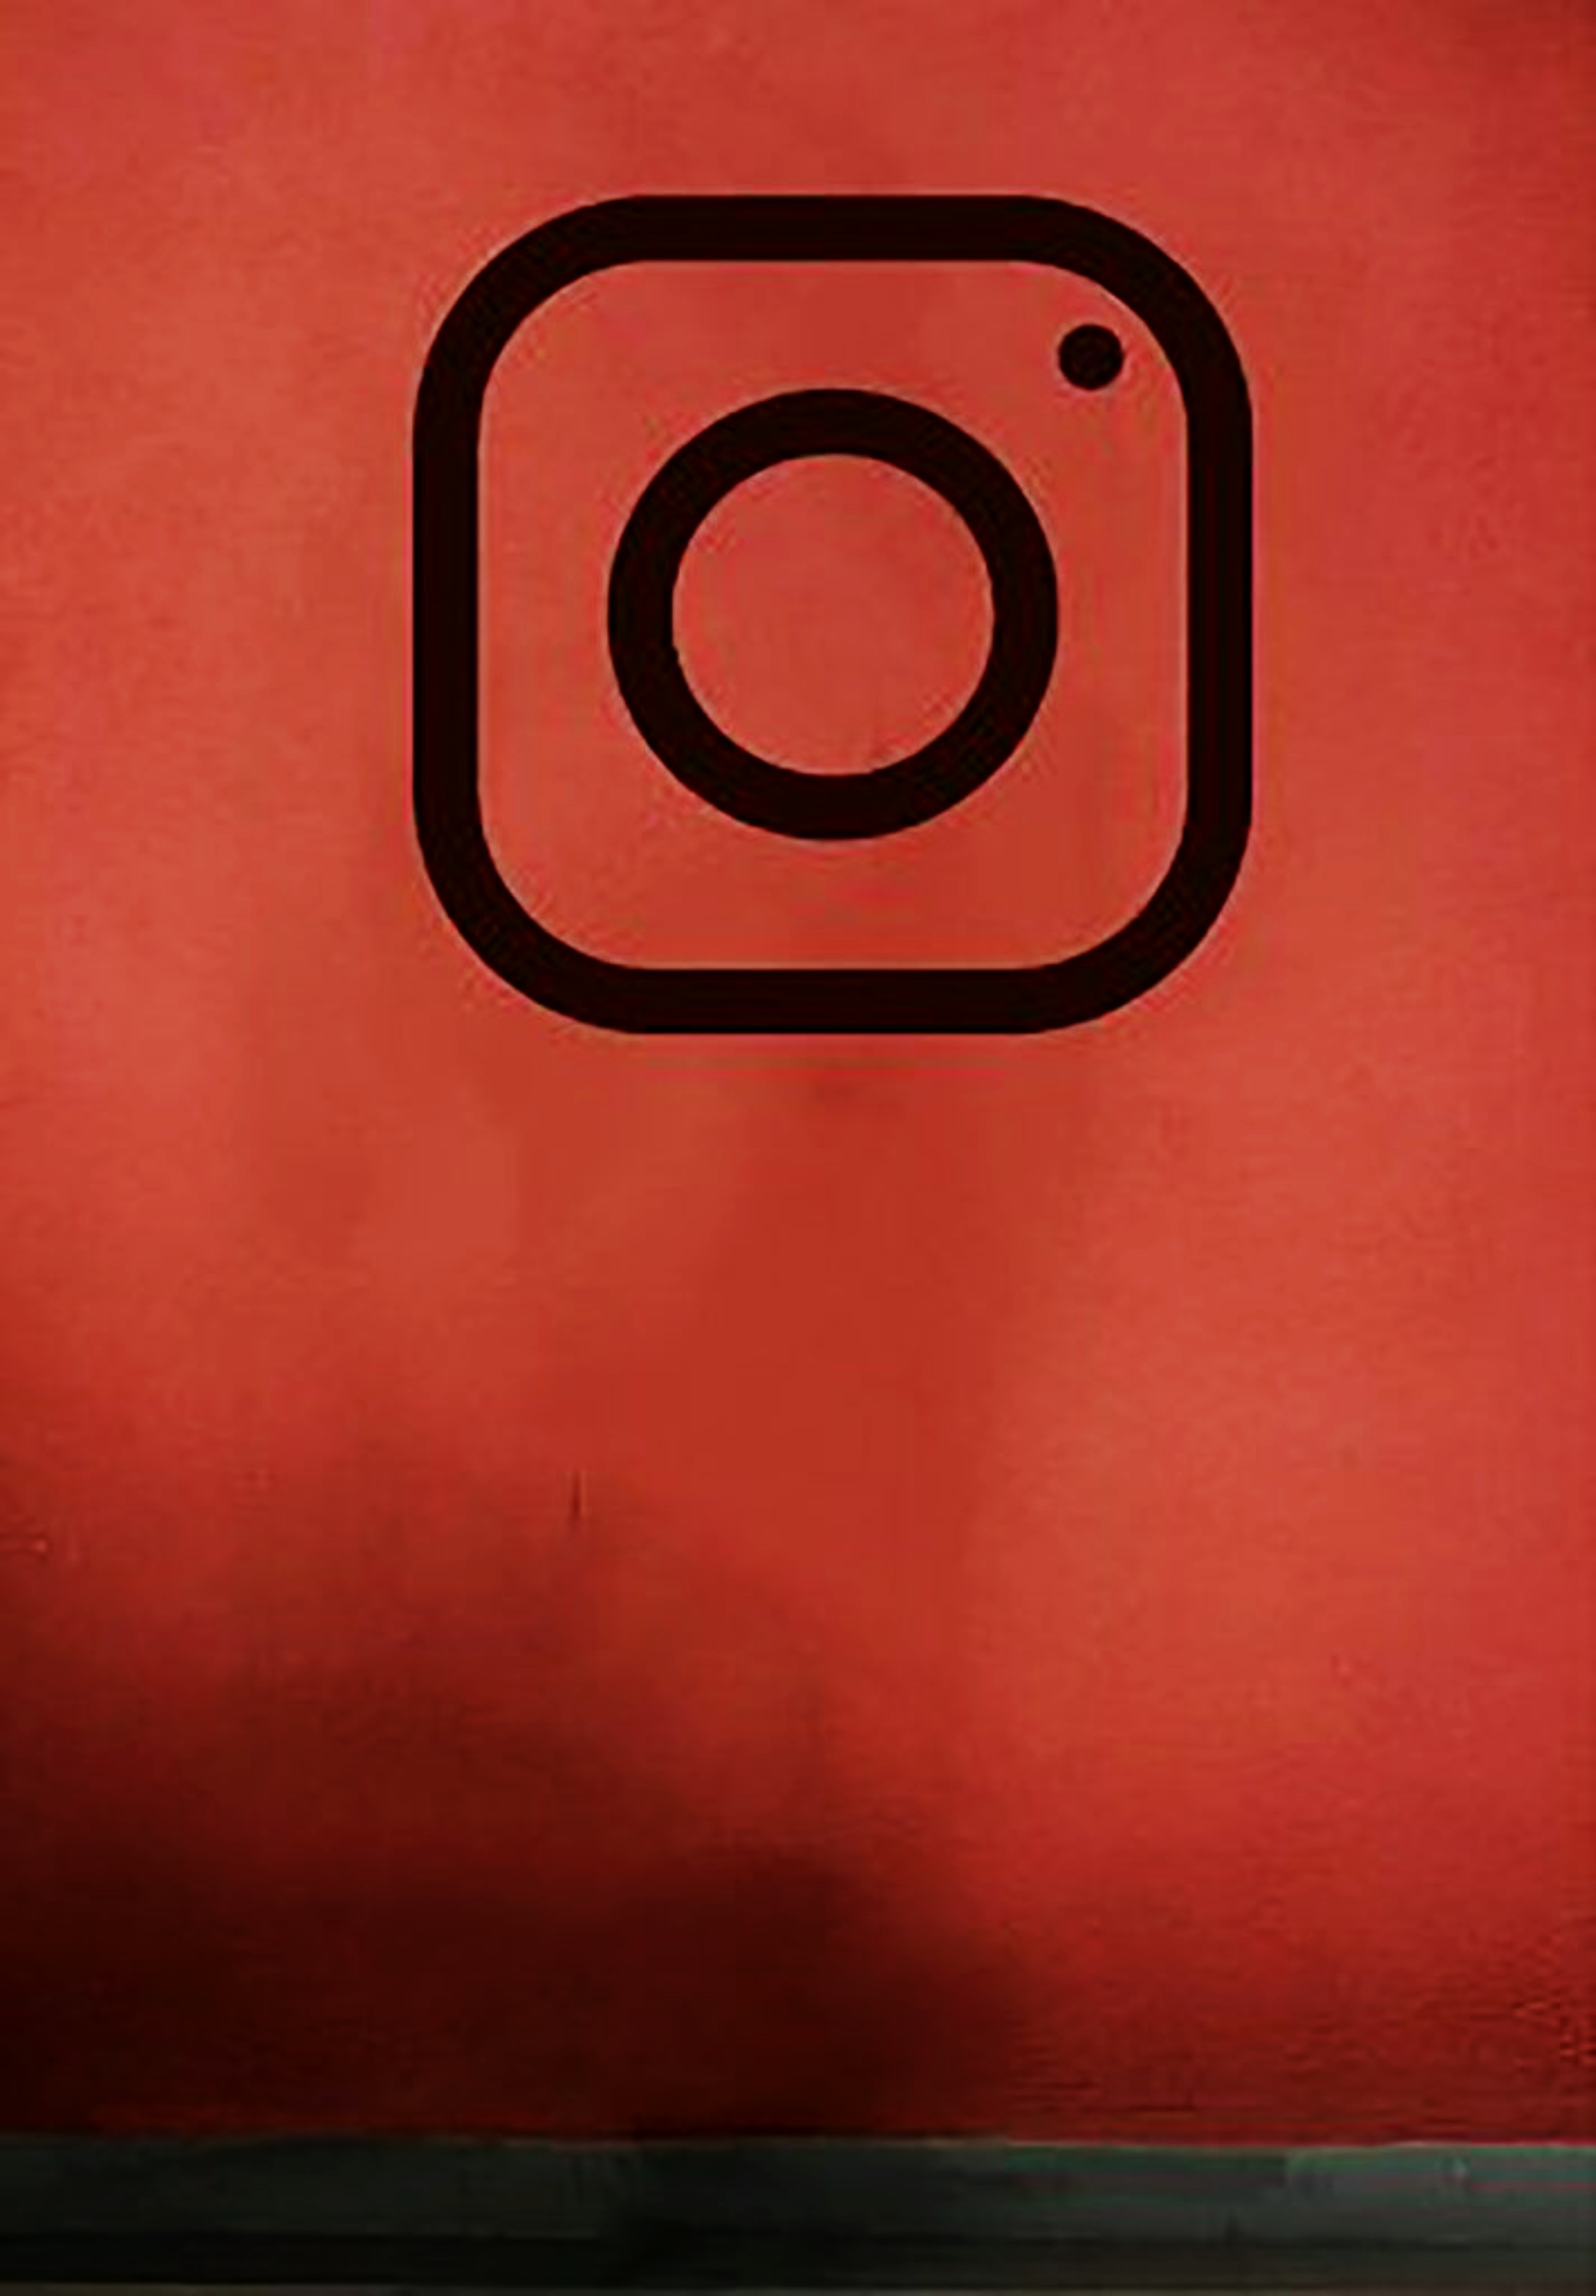 You are currently viewing Instagram logo in wall image download free